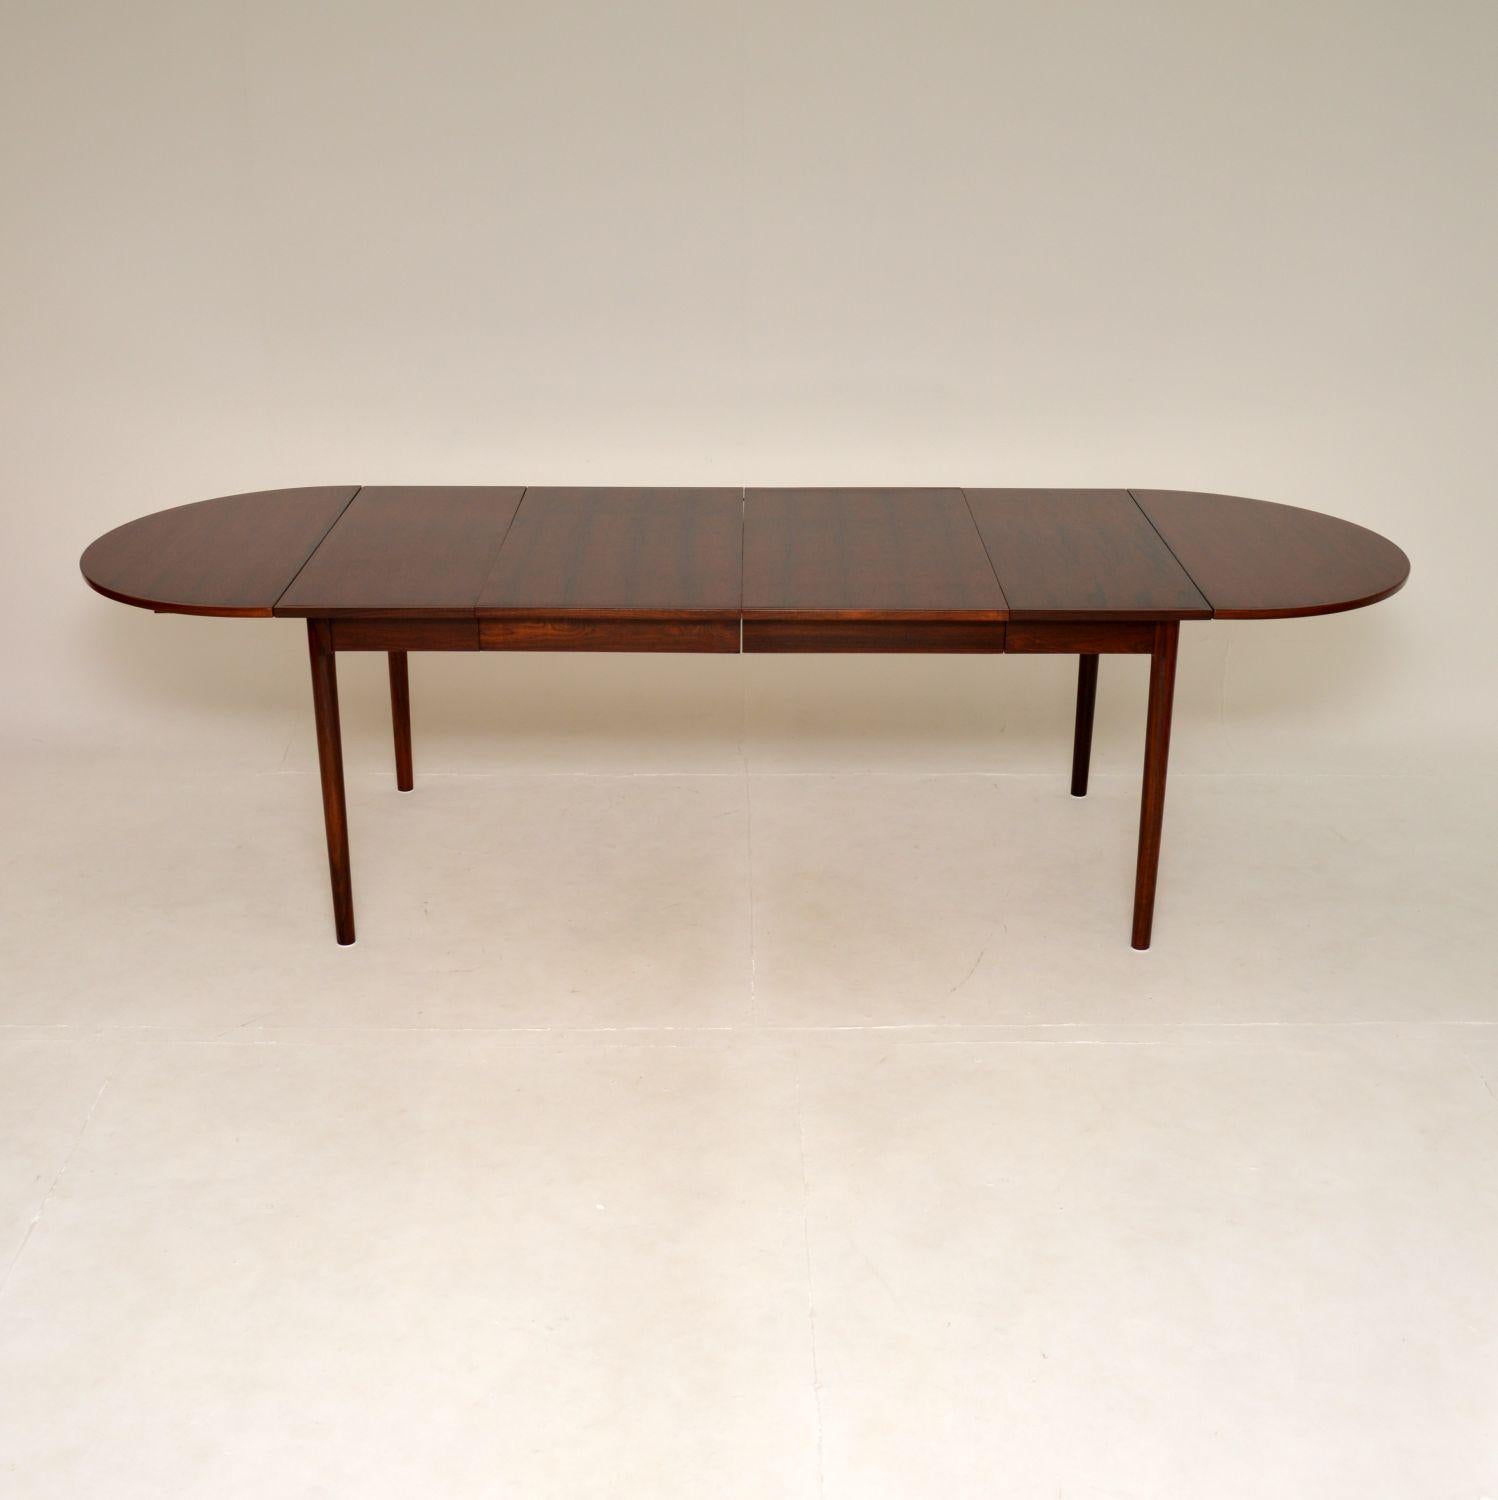 A stunning and rare Danish vintage dining table by Arne Vodder. This is the model 227 table, it was made in Denmark and dates from the 1960’s.

It is very well made, the quality is superb. This has stunning grain patterns throughout, it has a